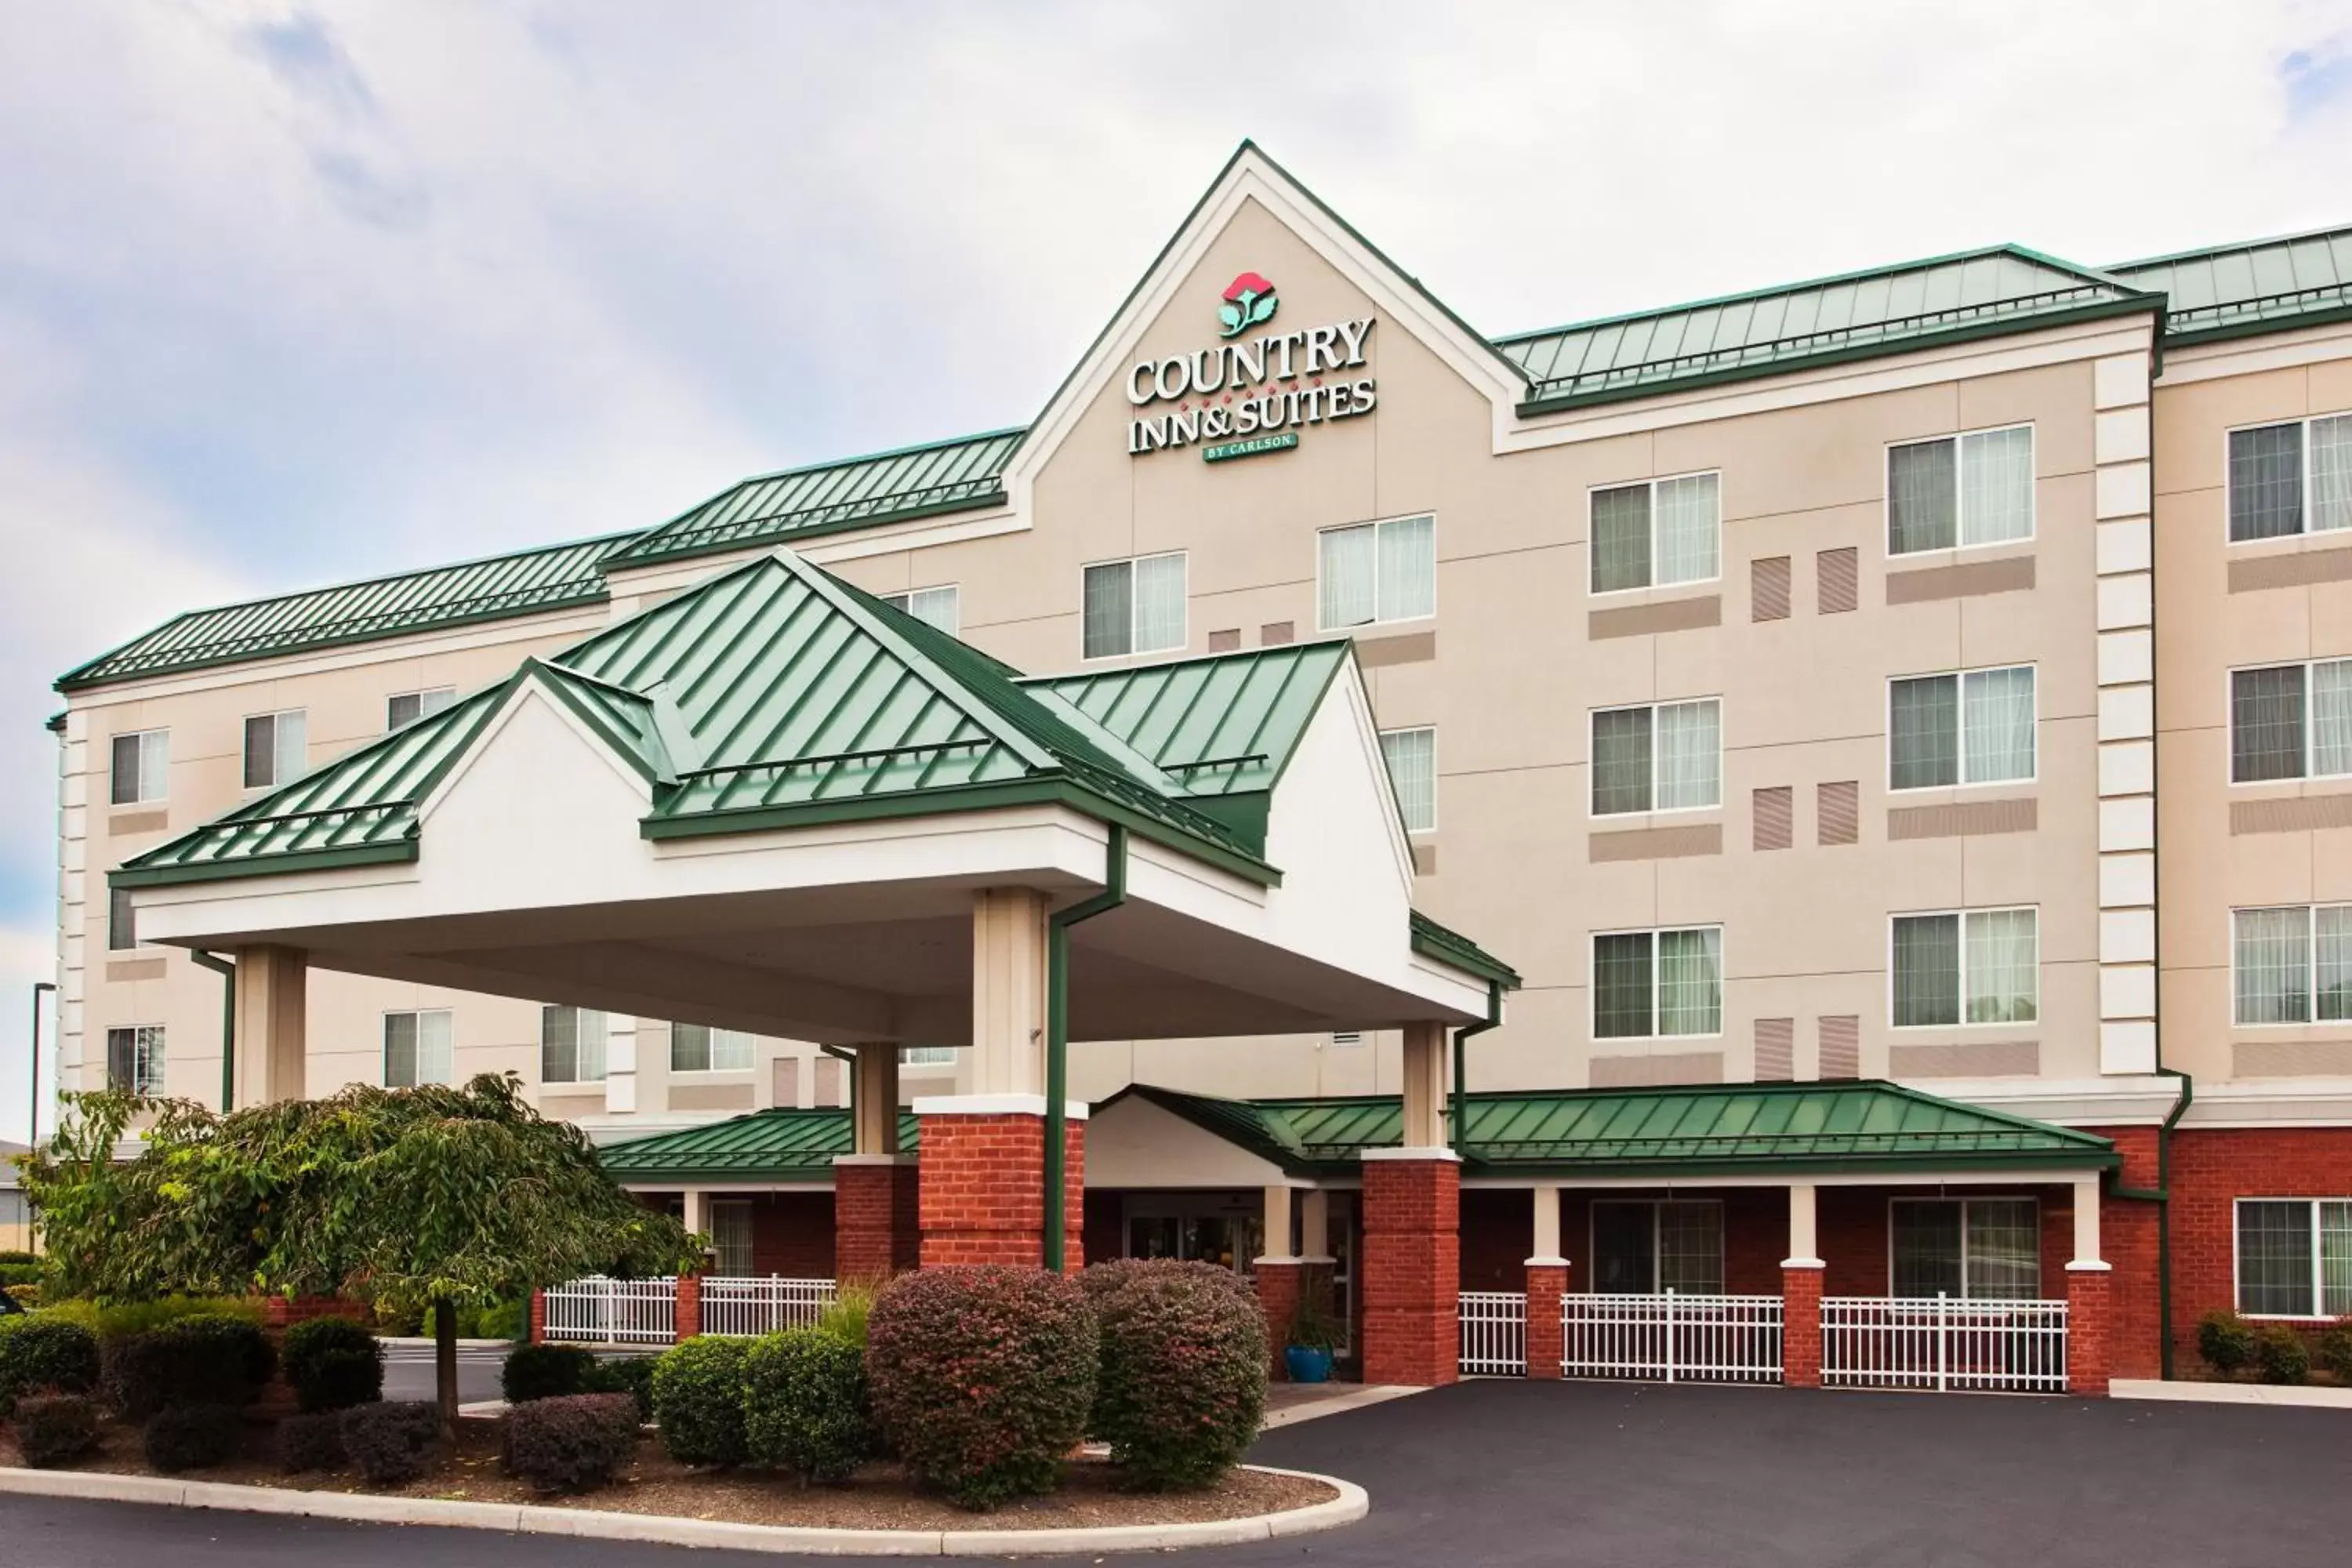 Facade/entrance, Property Building in Country Inn & Suites by Radisson, Hagerstown, MD